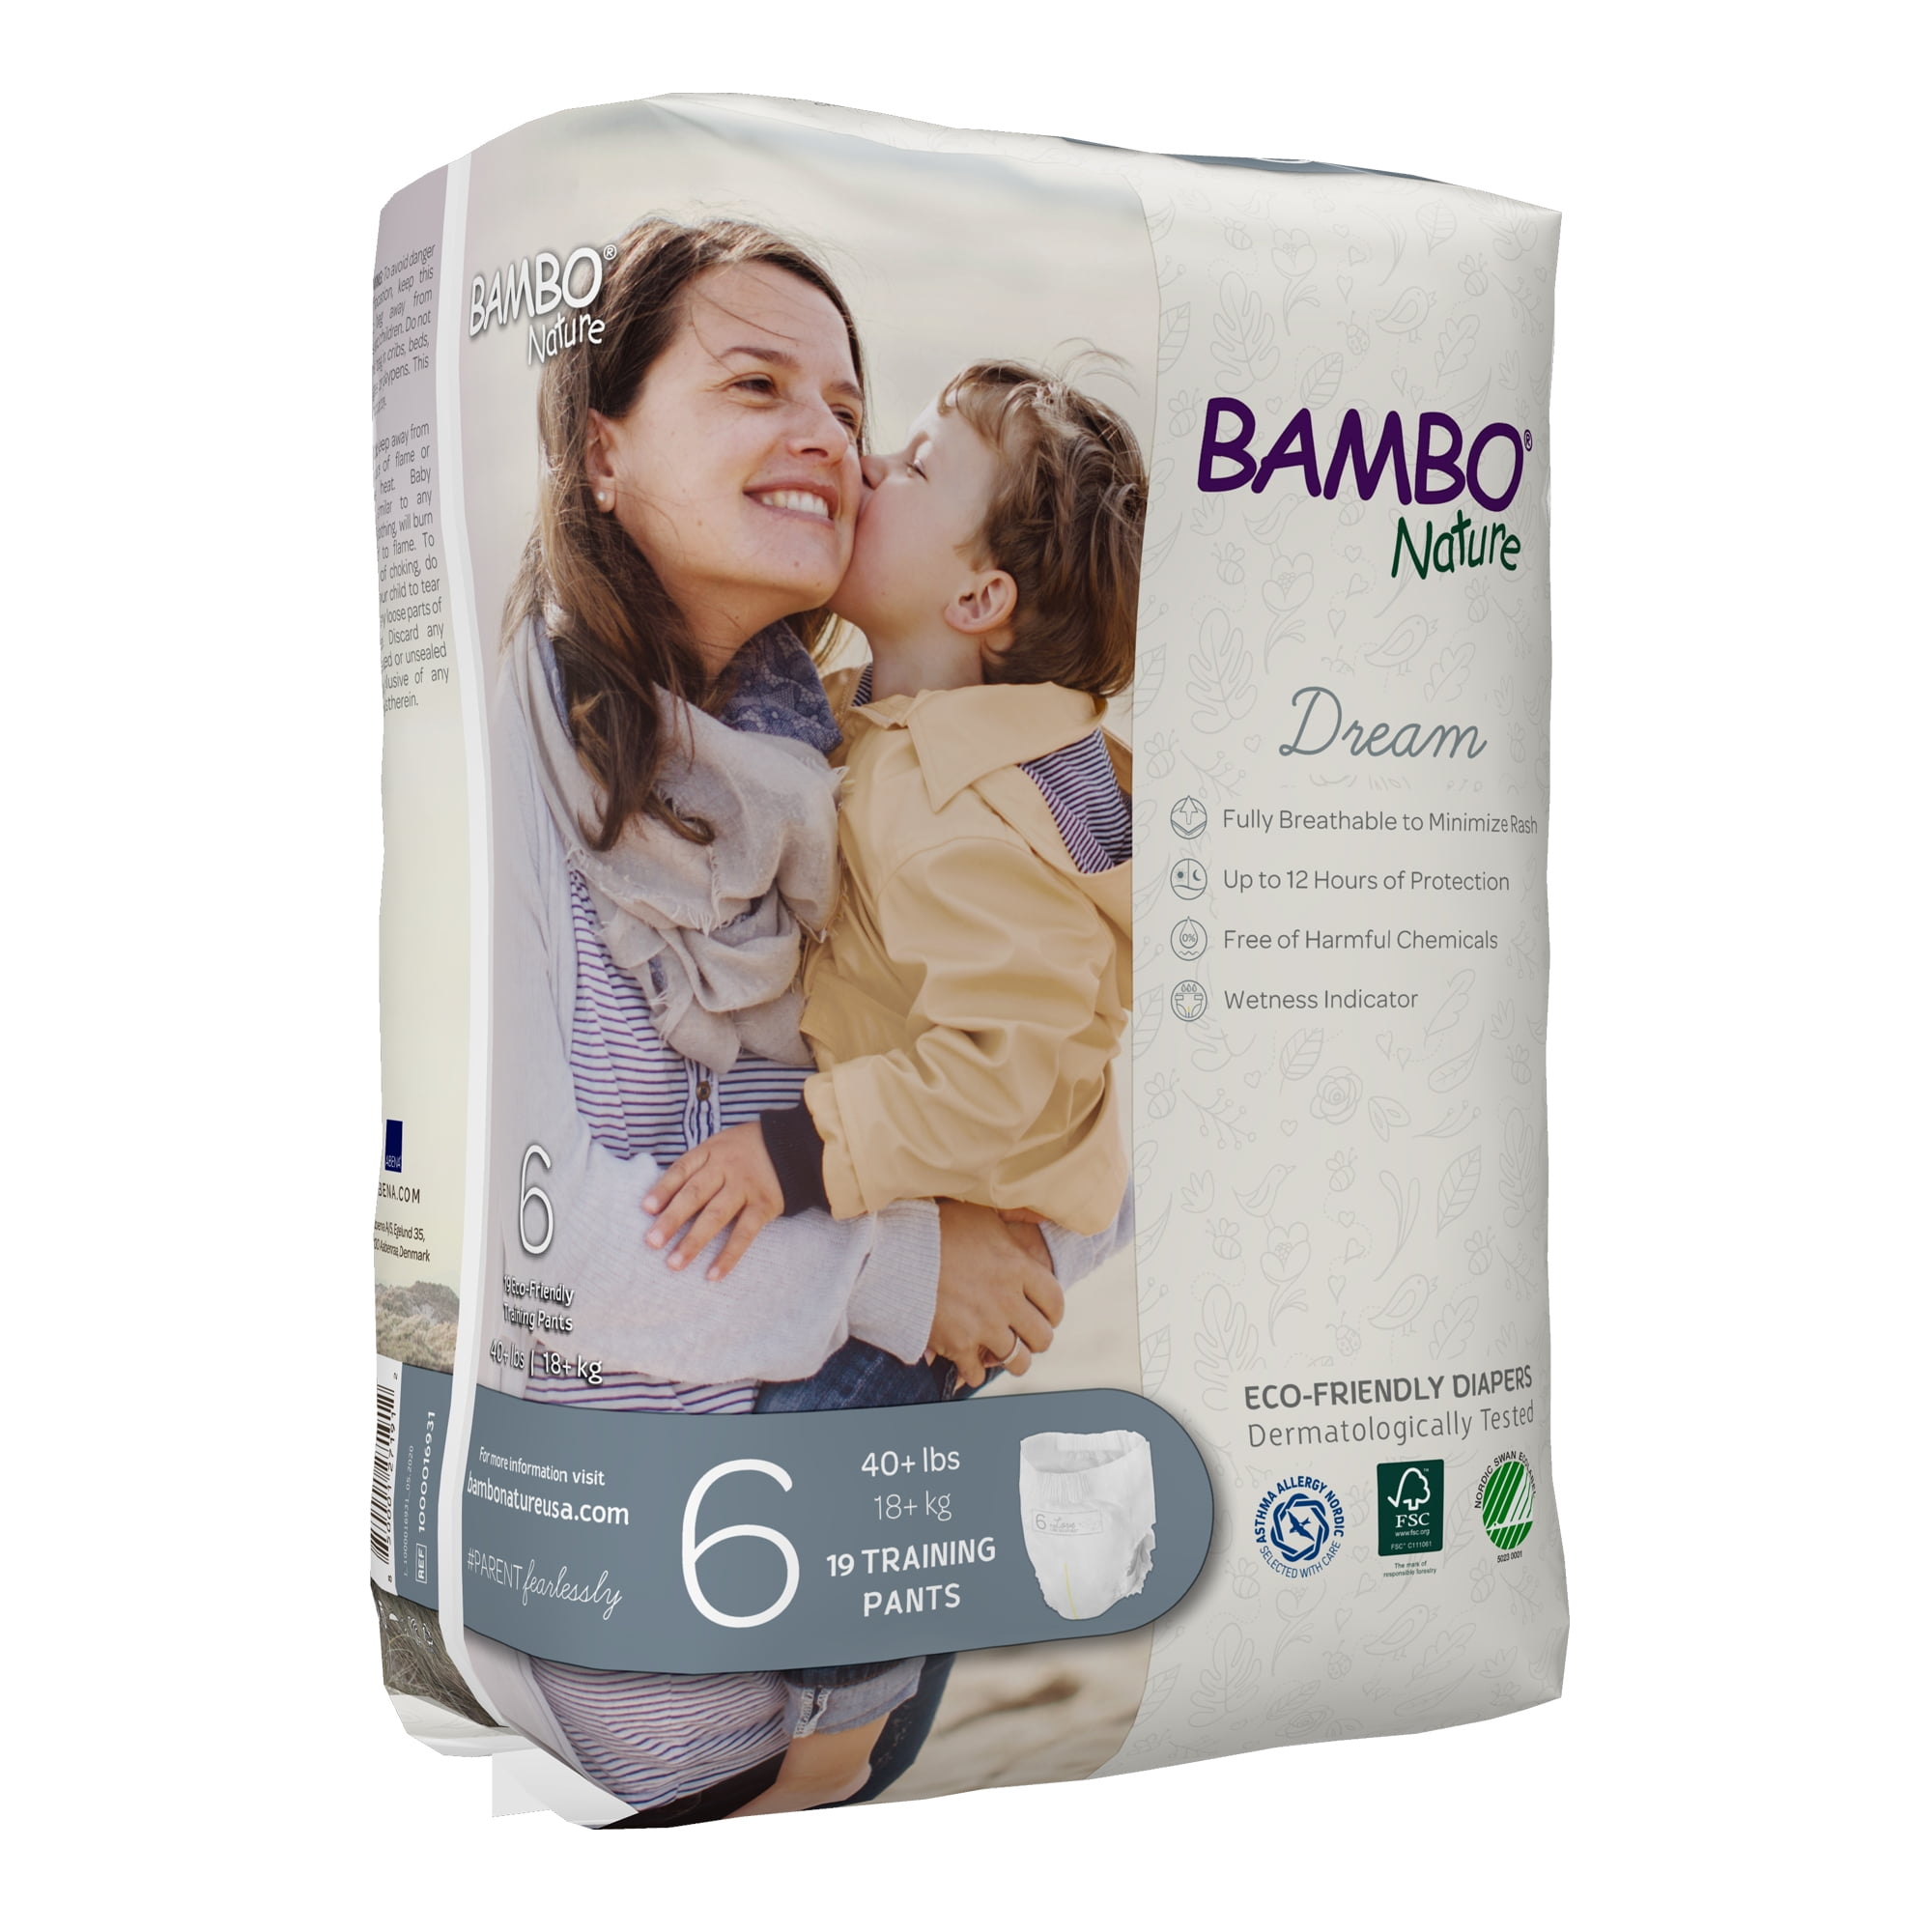 95 Count Size 6 Bambo Nature Premium Eco-Friendly Training Pants 35+ Lbs 5 Packs of 19 